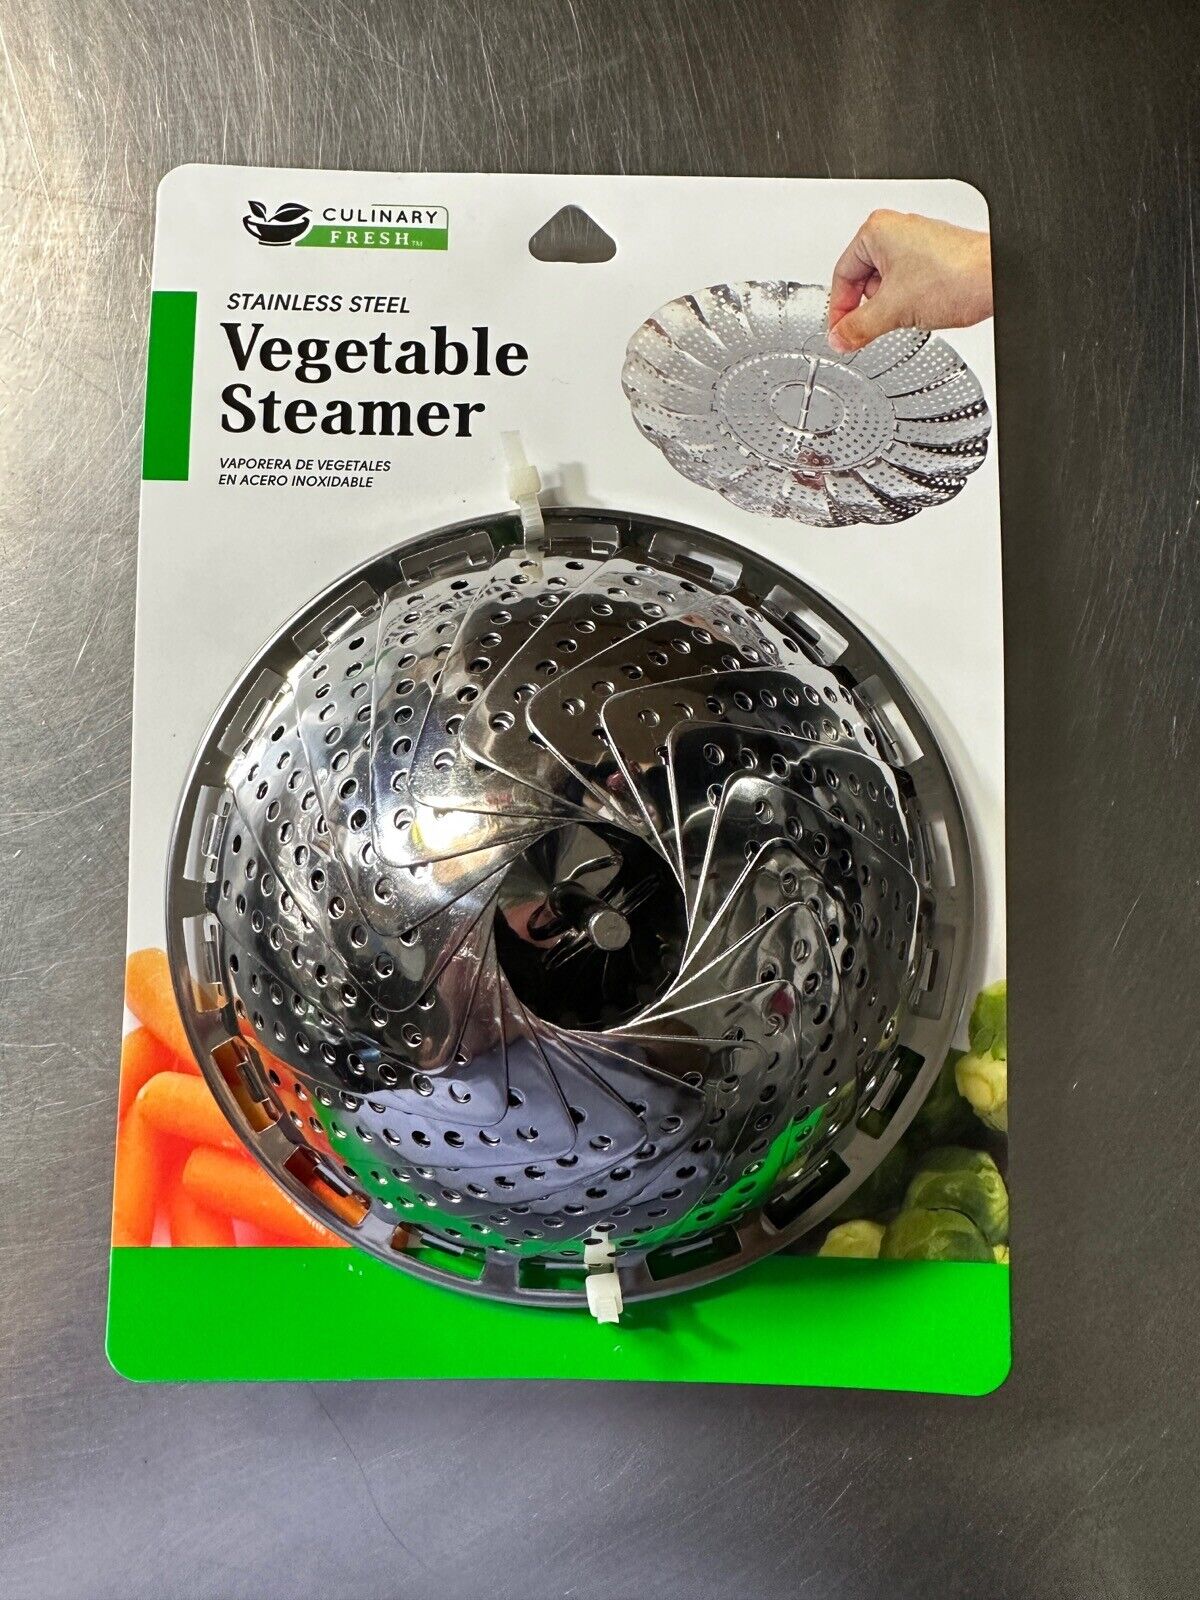 Culinary Fresh Stainless Steel Vegetable Steamer New In Pack